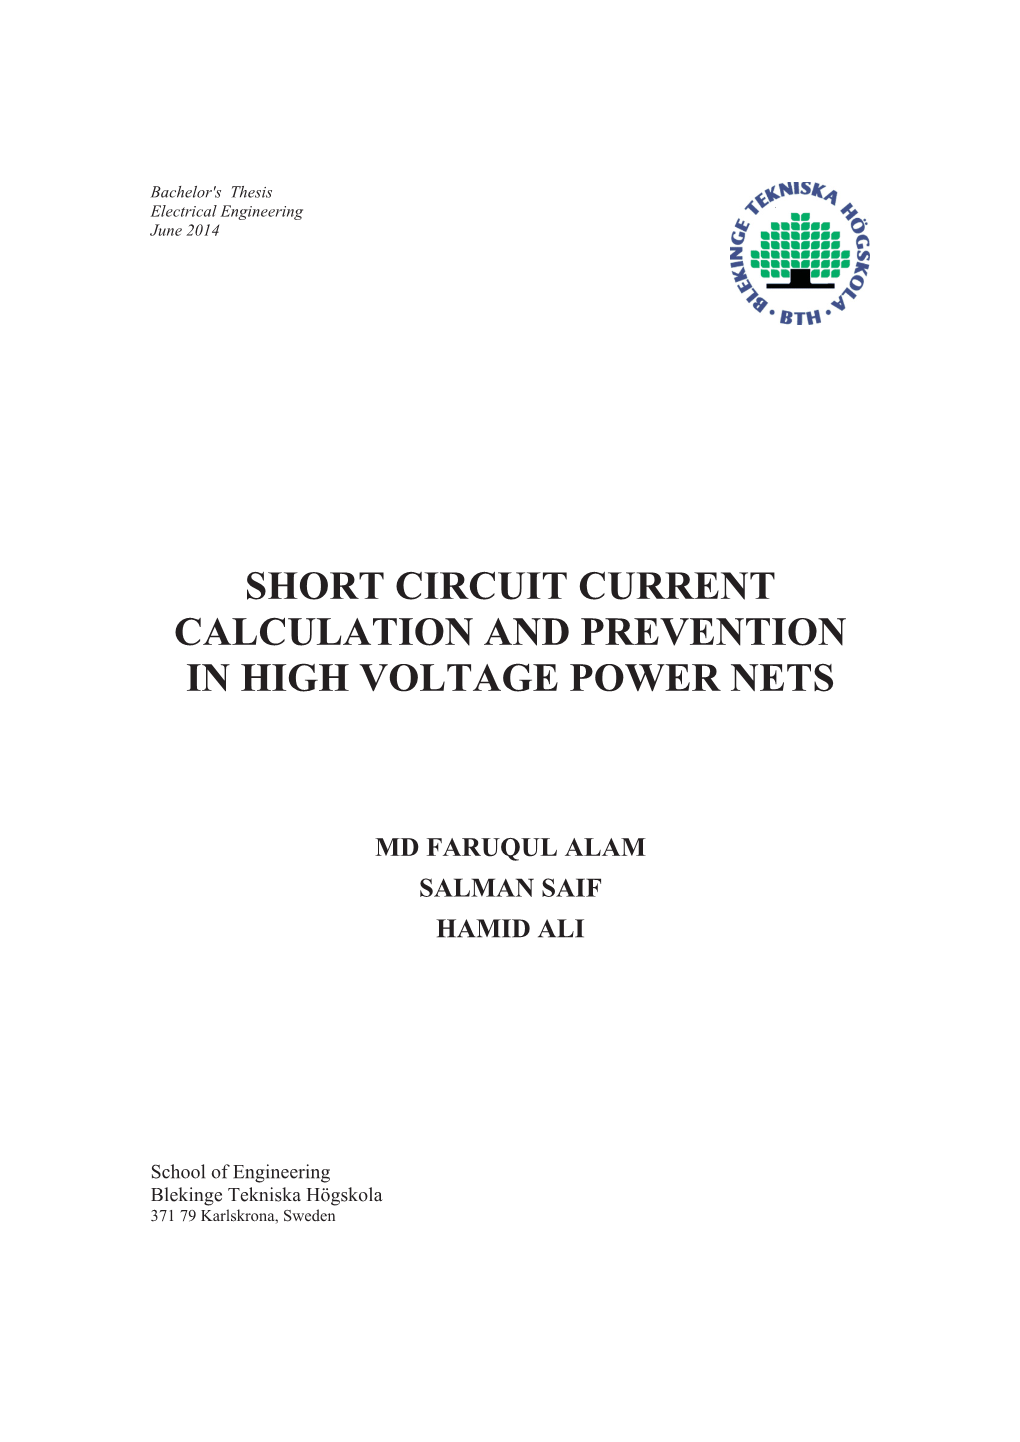 Short Circuit Current Calculation and Prevention in High Voltage Power Nets